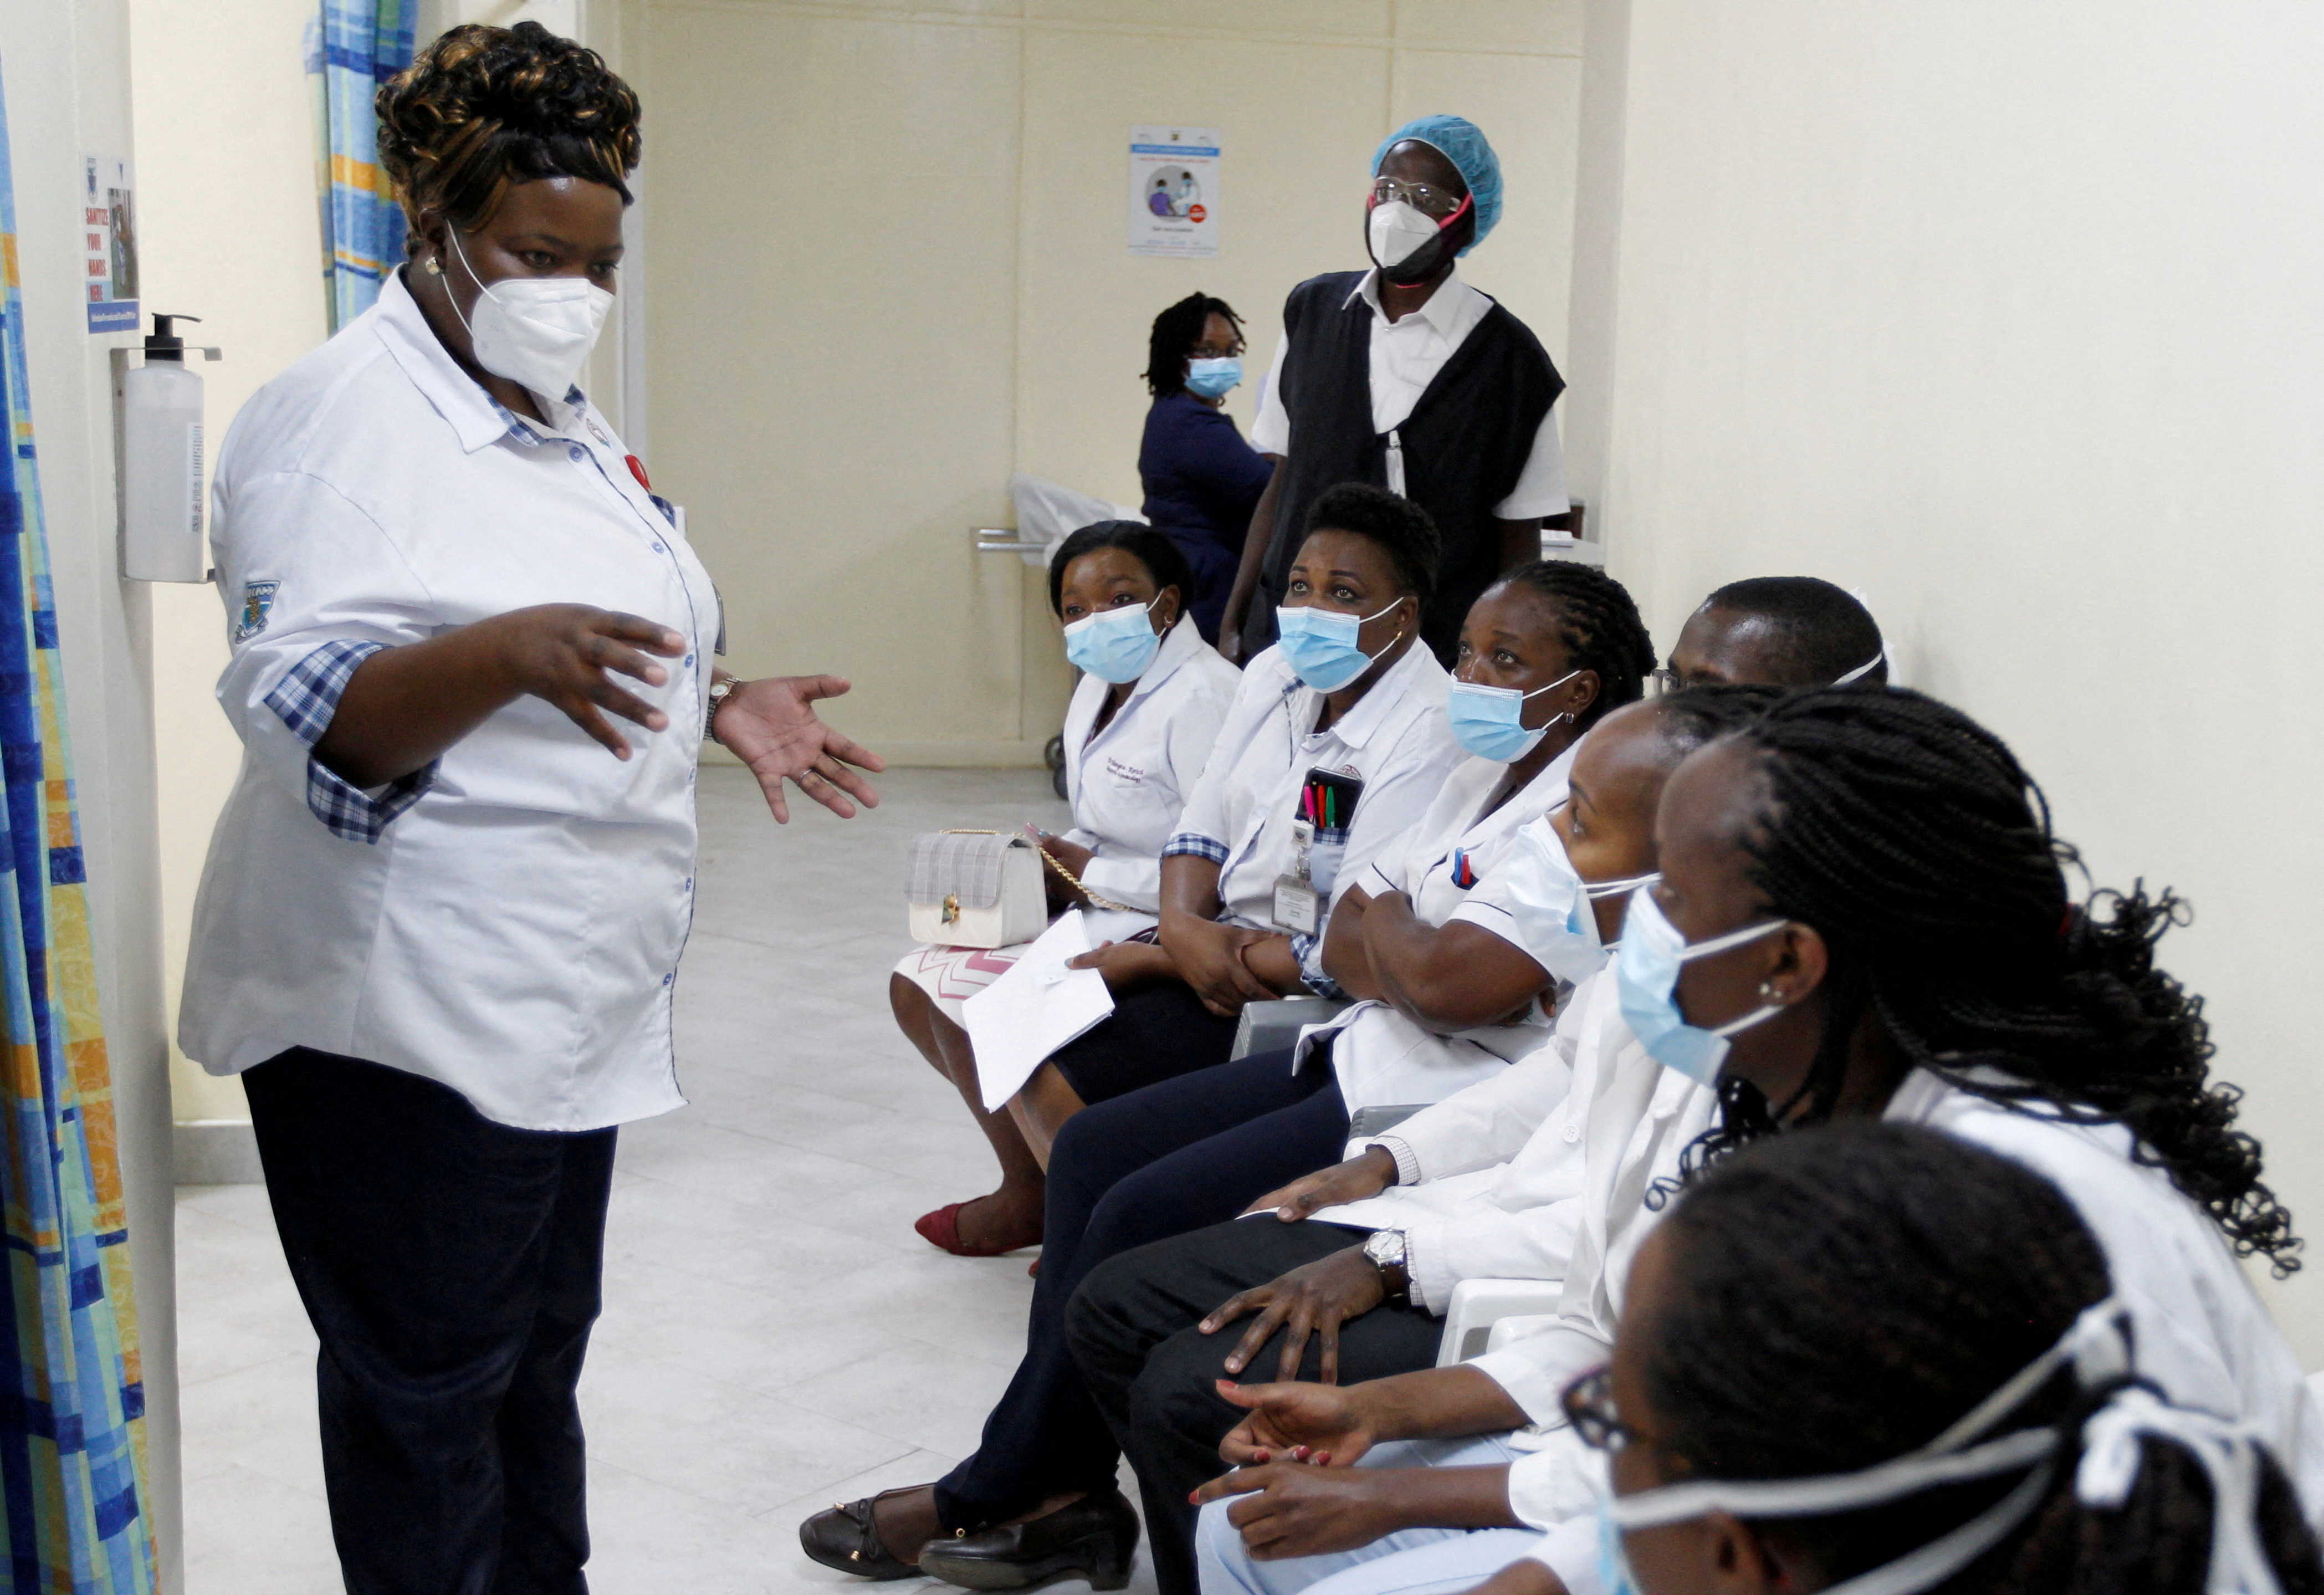 A health worker talks to her colleagues as they prepare to receive the AstraZeneca/Oxford vaccine under the COVAX scheme against coronavirus disease (COVID-19) at the Kenyatta National Hospital in Nairobi,